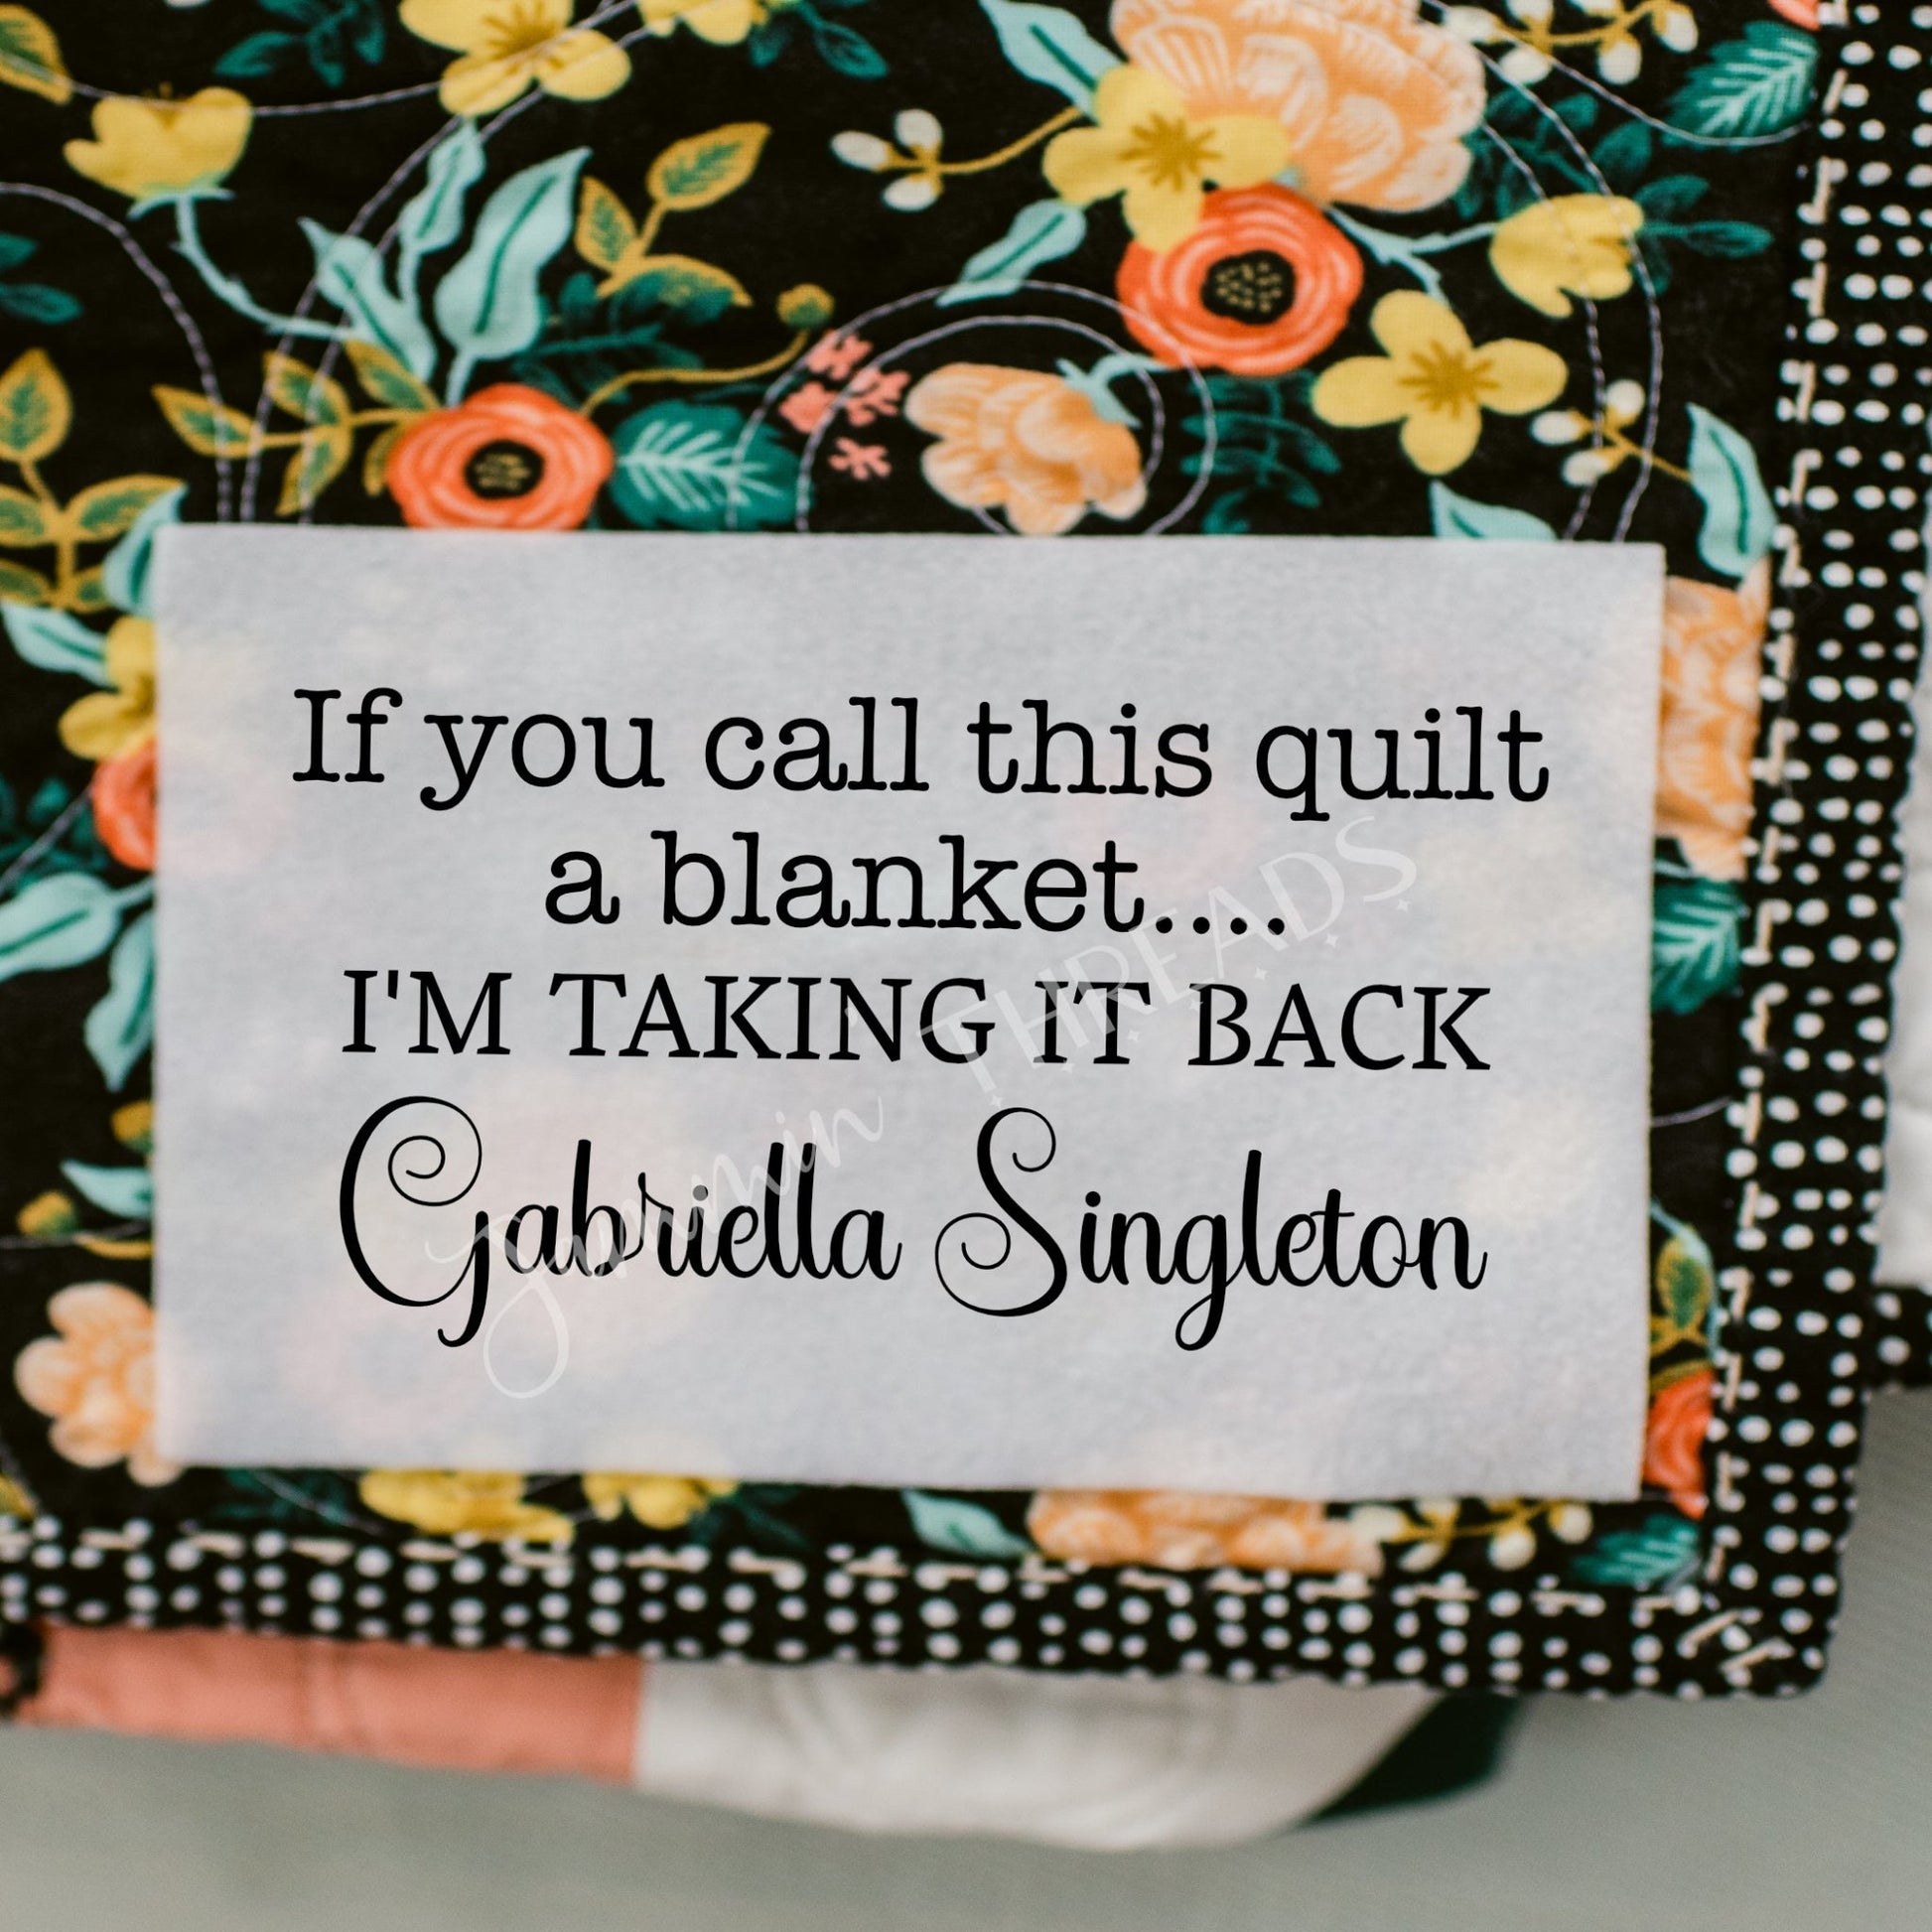 If You Call this Quilt A Blanket, I'm Taking it Back. Sarcastic, personalized quilt labels - Jammin Threads